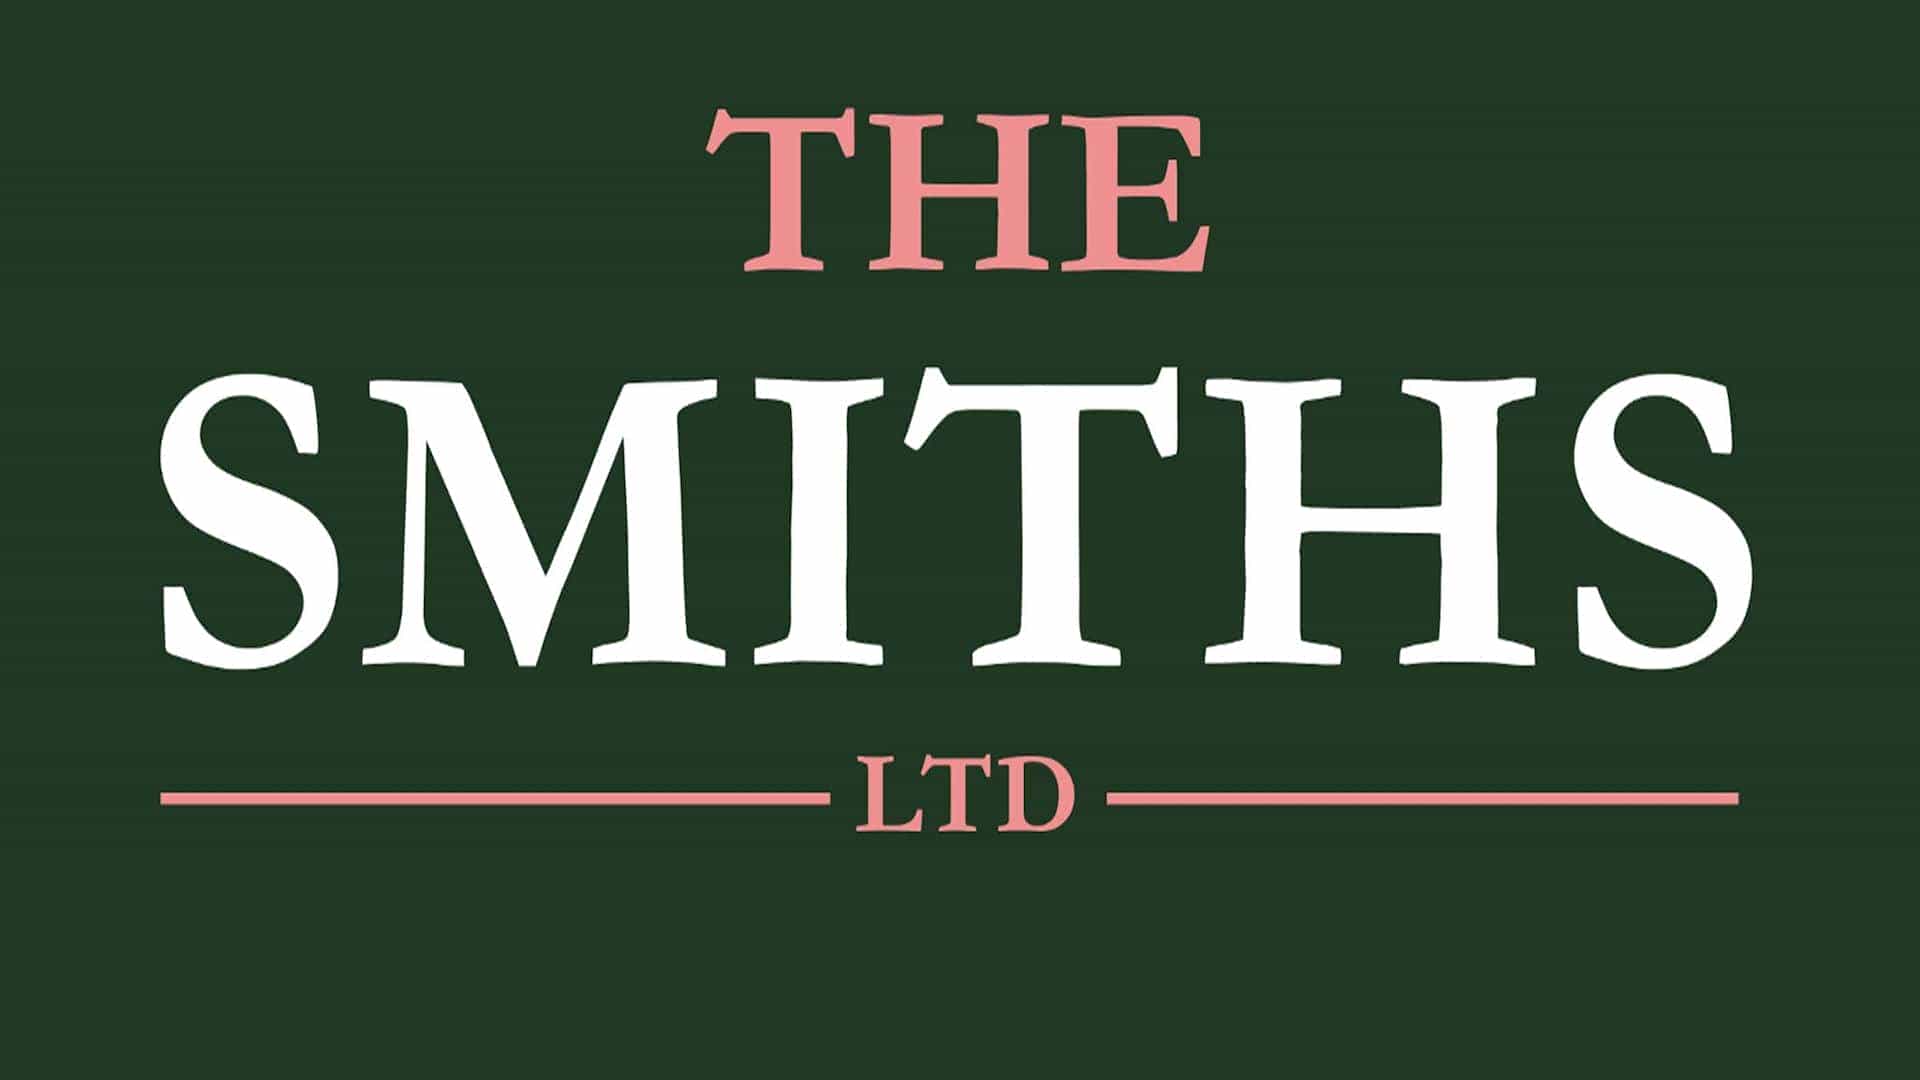 The Smiths Ltd - The Smiths Tribute Band